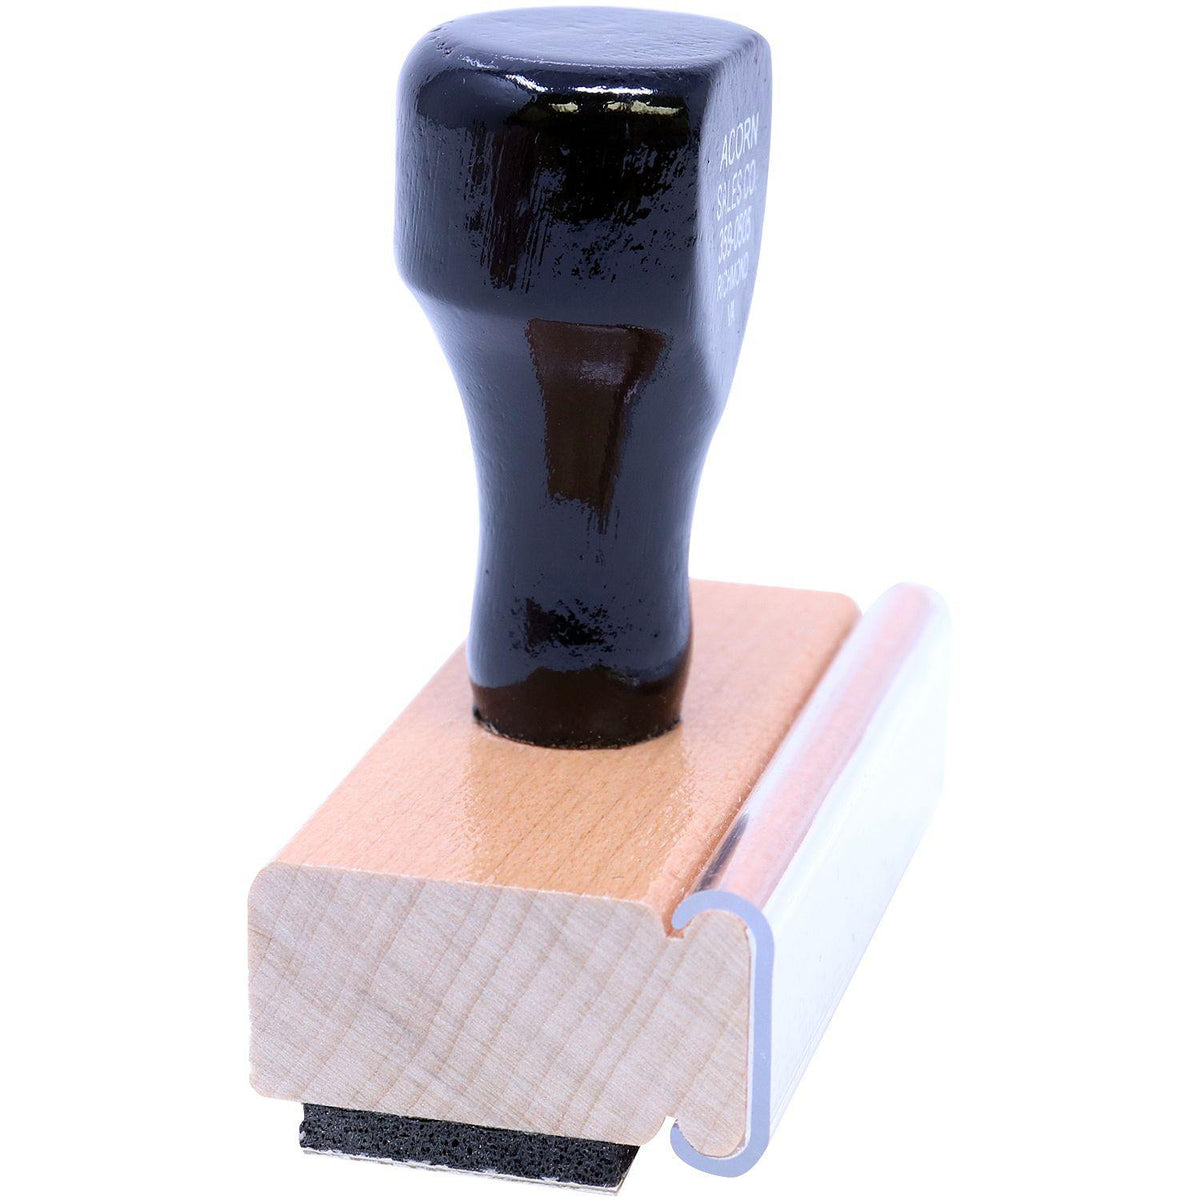 Side View of Large Broker Copy Rubber Stamp at an Angle